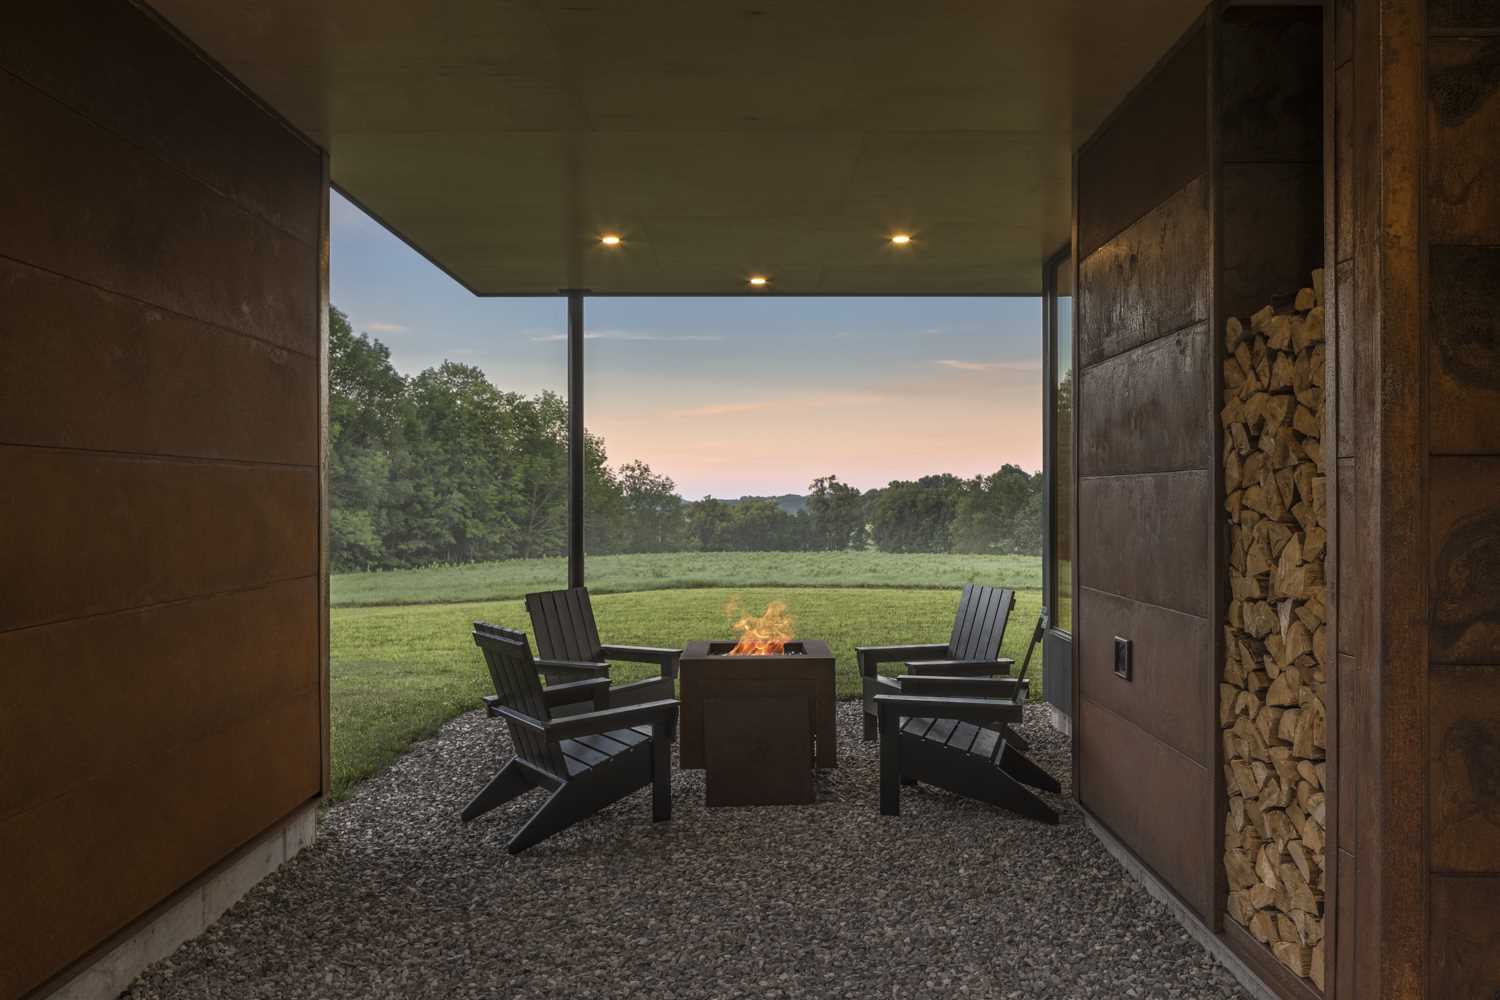 A covered outdoor patio, located between the main house and an art studio, includes a firepit surrounded by chairs.